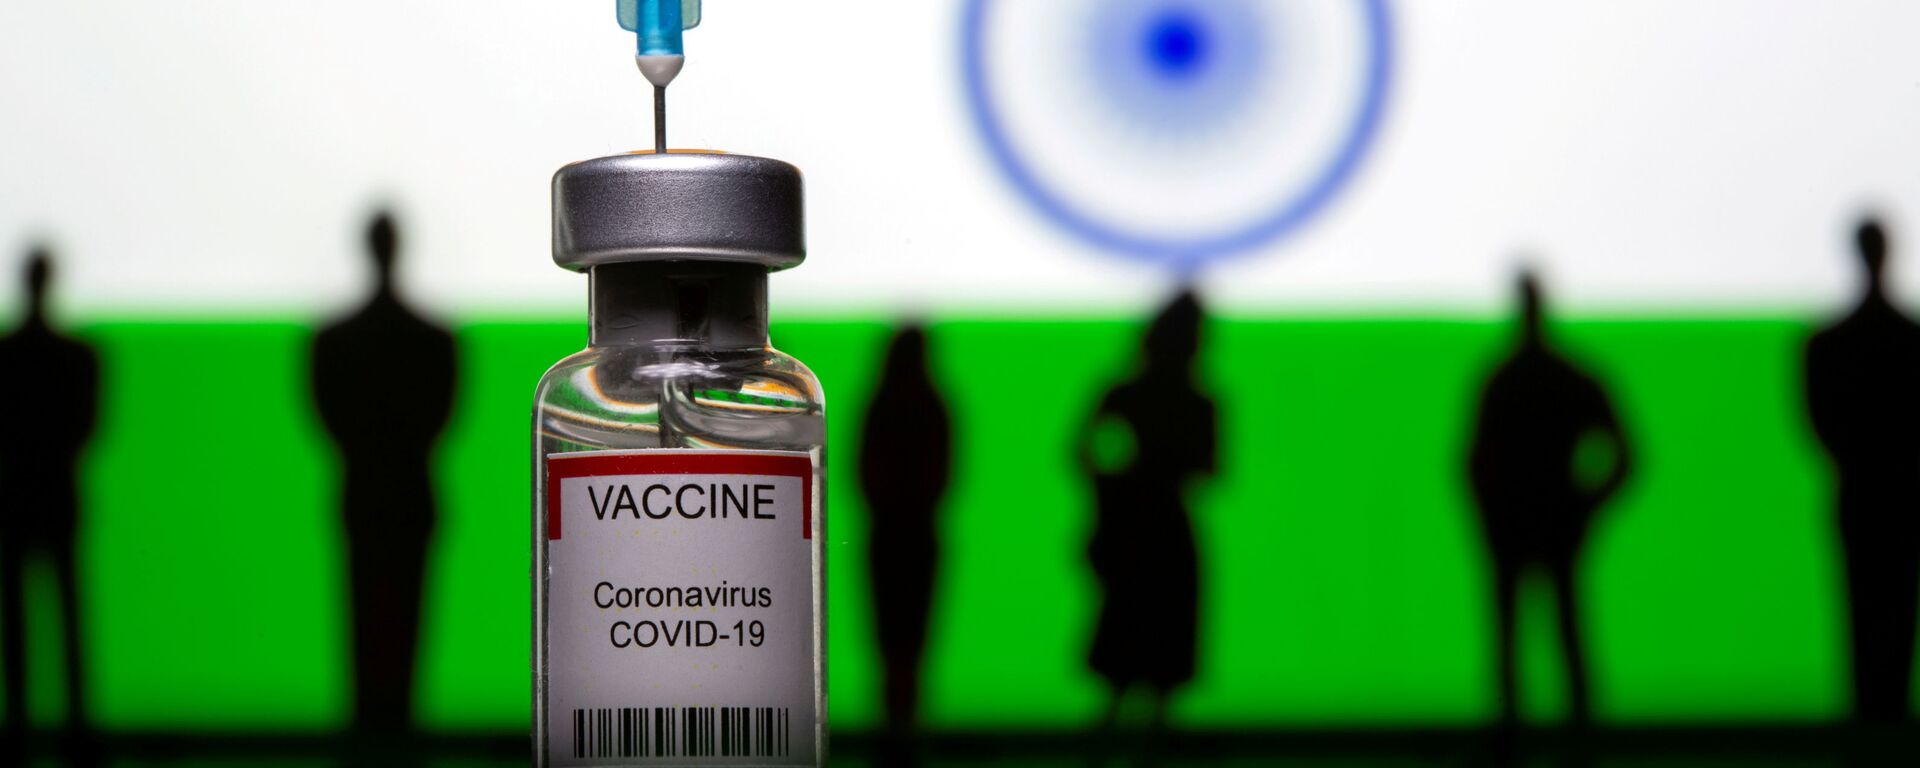 3D-printed small toy figurines, a syringe and vial labelled coronavirus disease (COVID-19) vaccine are seen in front of India flag - Sputnik International, 1920